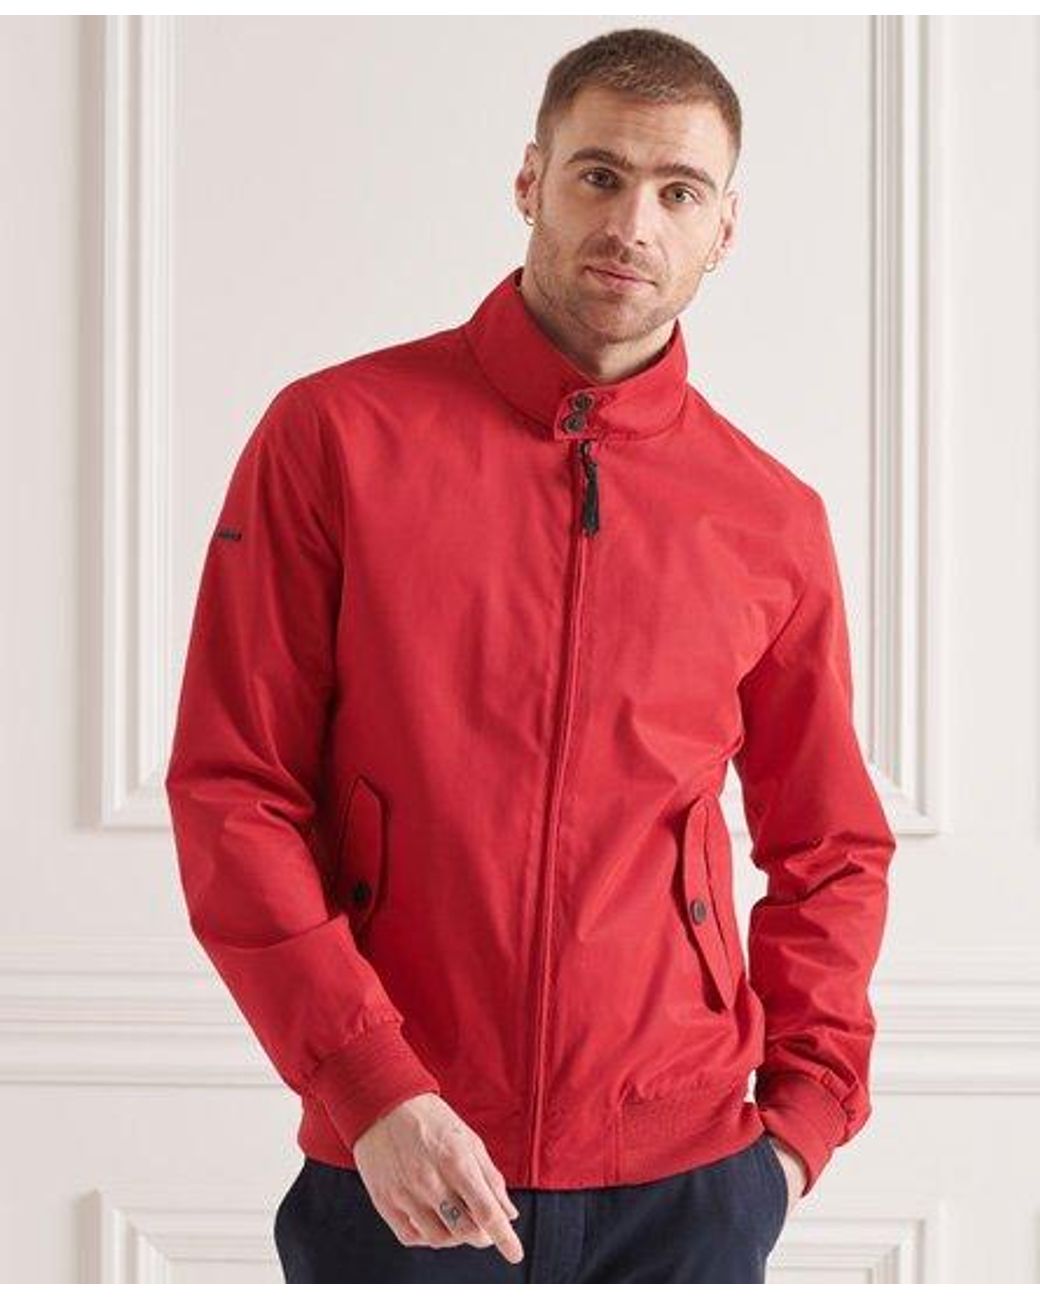 Superdry Iconic Harrington Jacket in Red for Men - Lyst